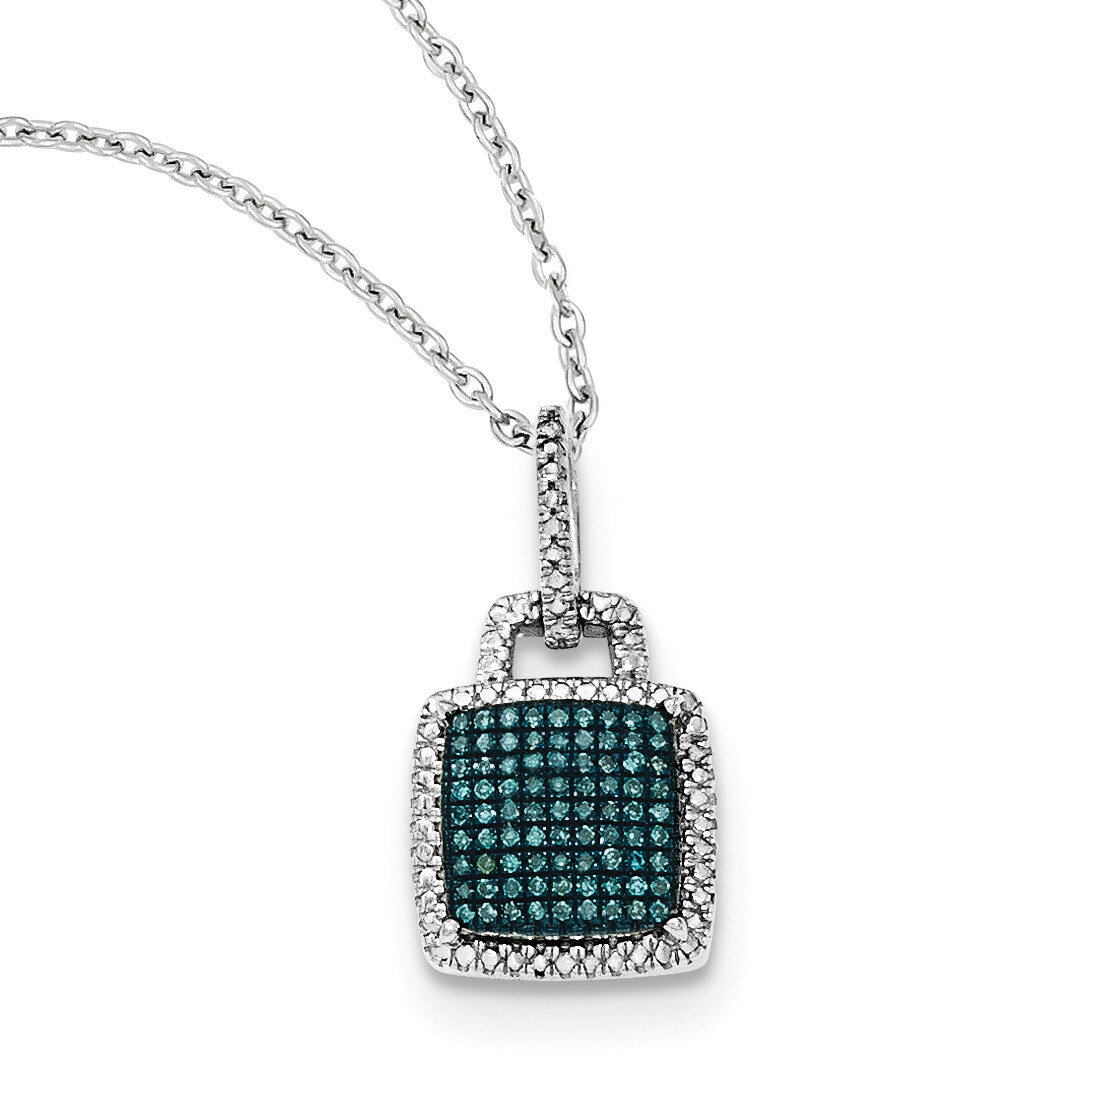 Blue and White Diamond Square Pendant Sterling Silver QP4691